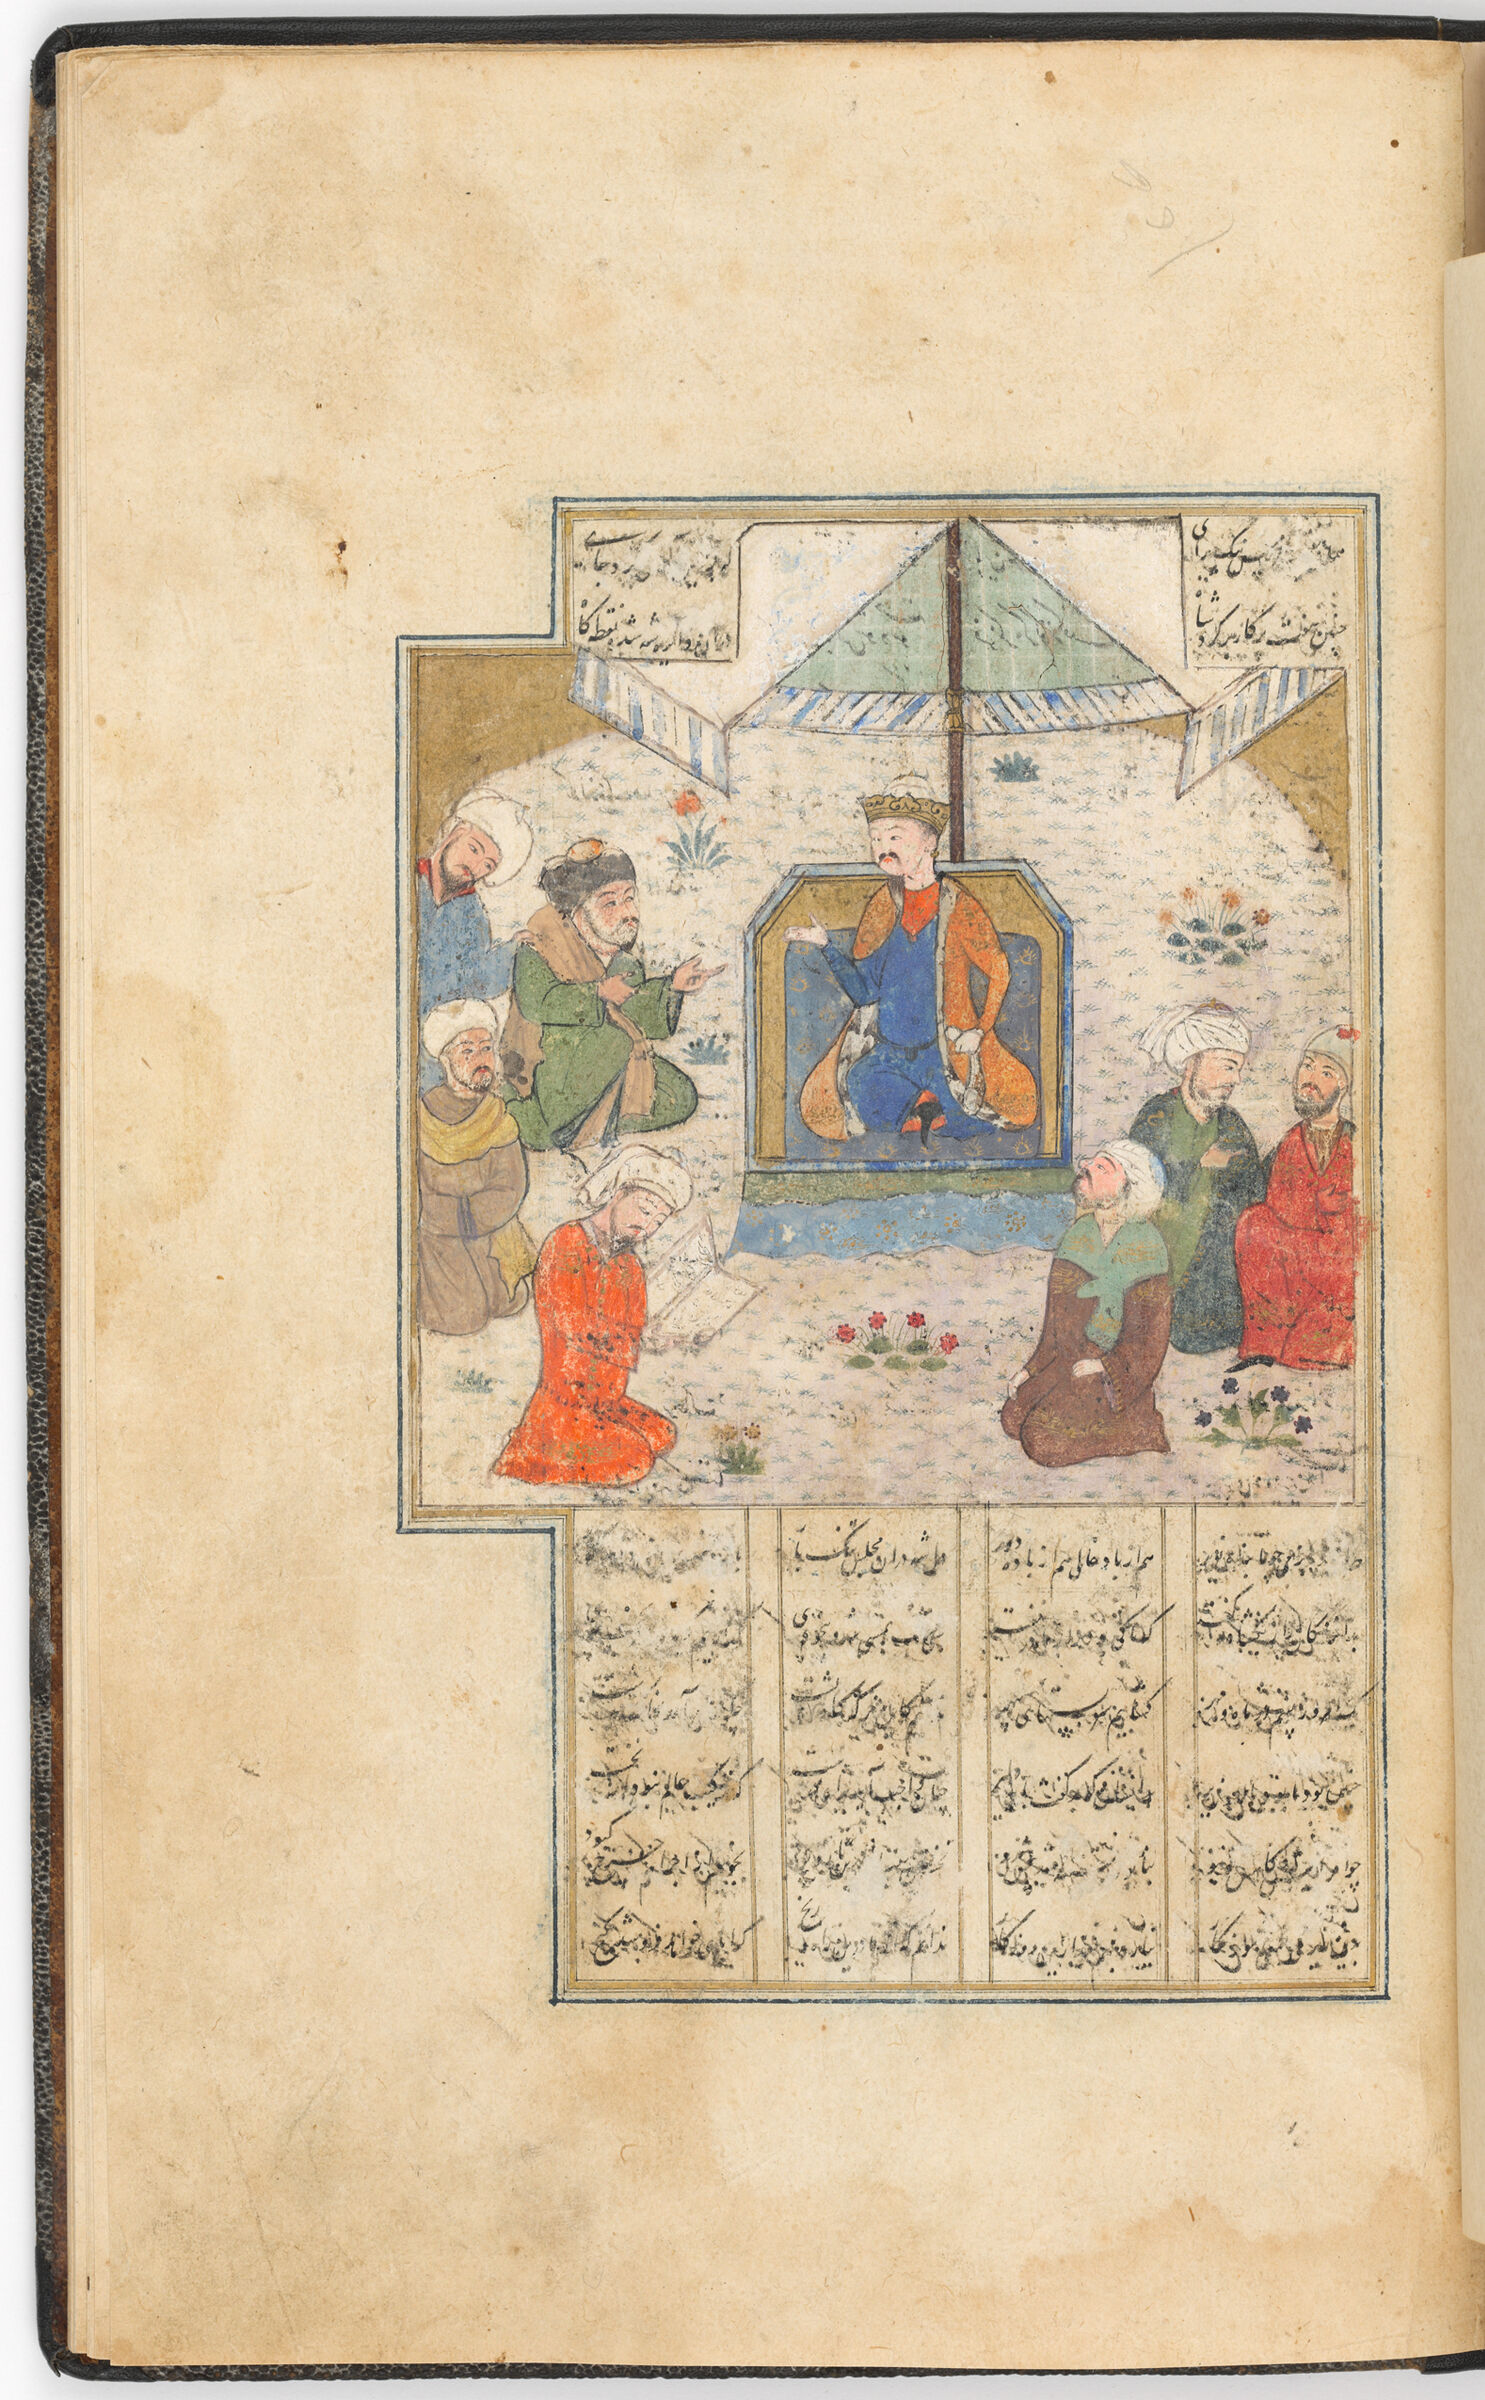 Iskandar With The Seven Sages (Text Verso; Painting Recto Of Folio 357), Painting From A Manuscript Of The Khamsa By Nizami